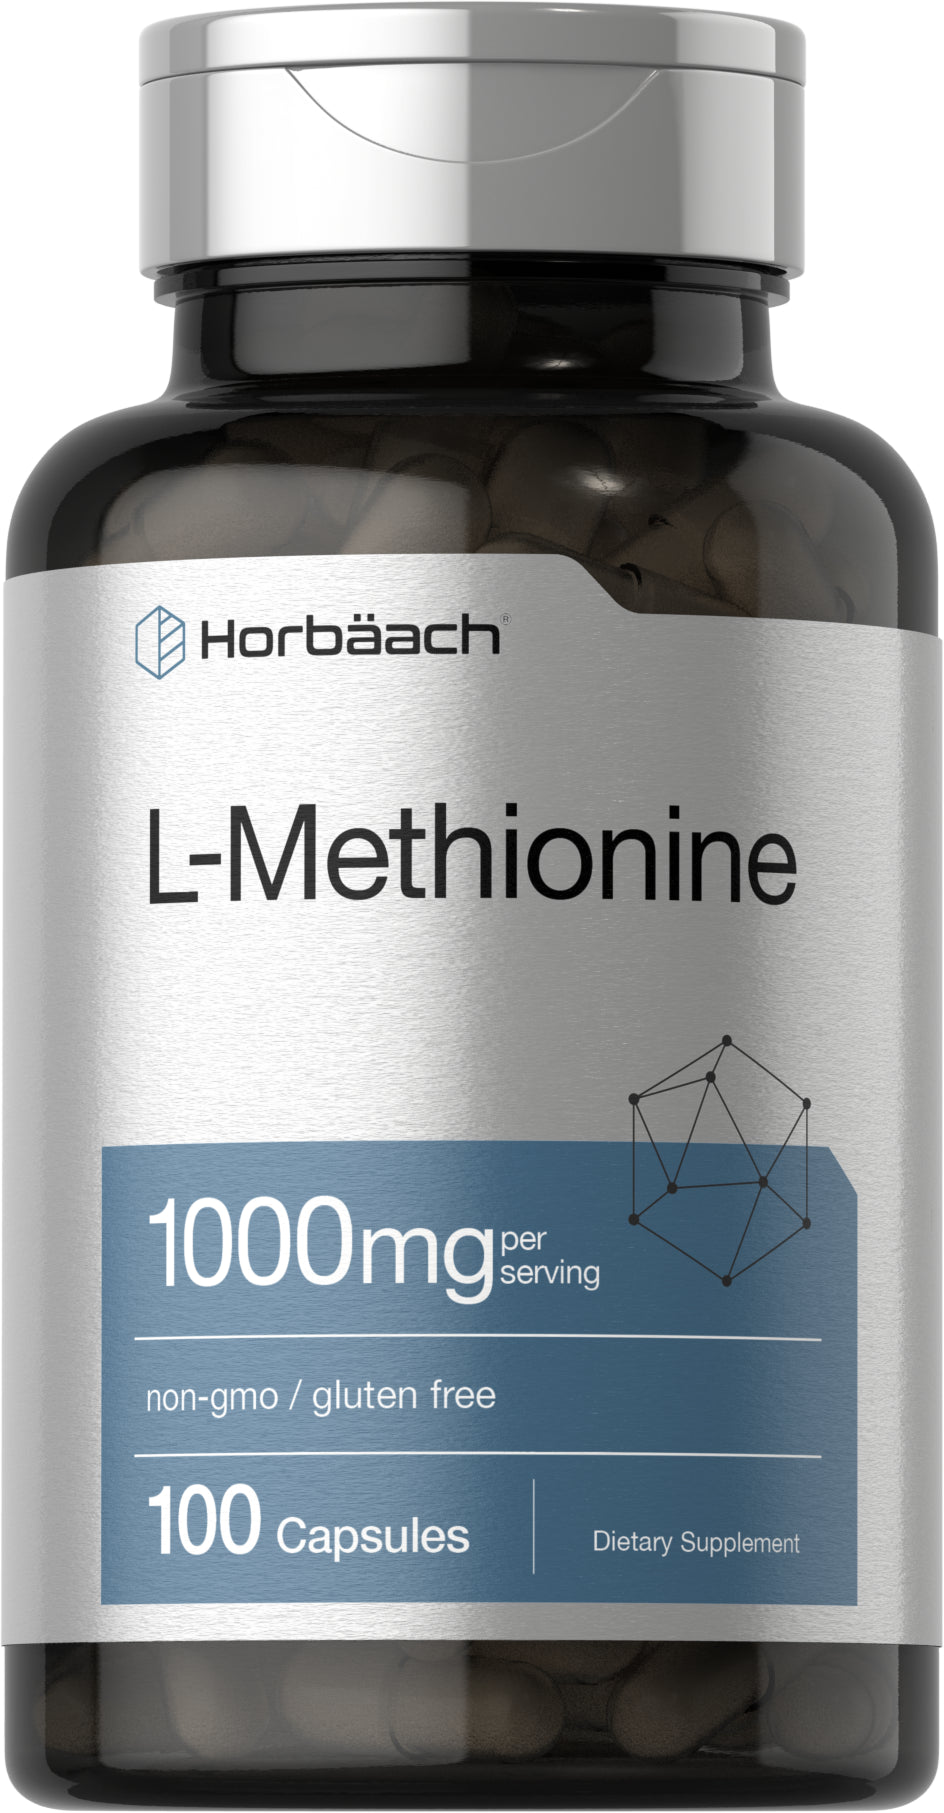 L Methionine 1000 Mg | 100 Capsules | Free Form Supplement | by Horbaach